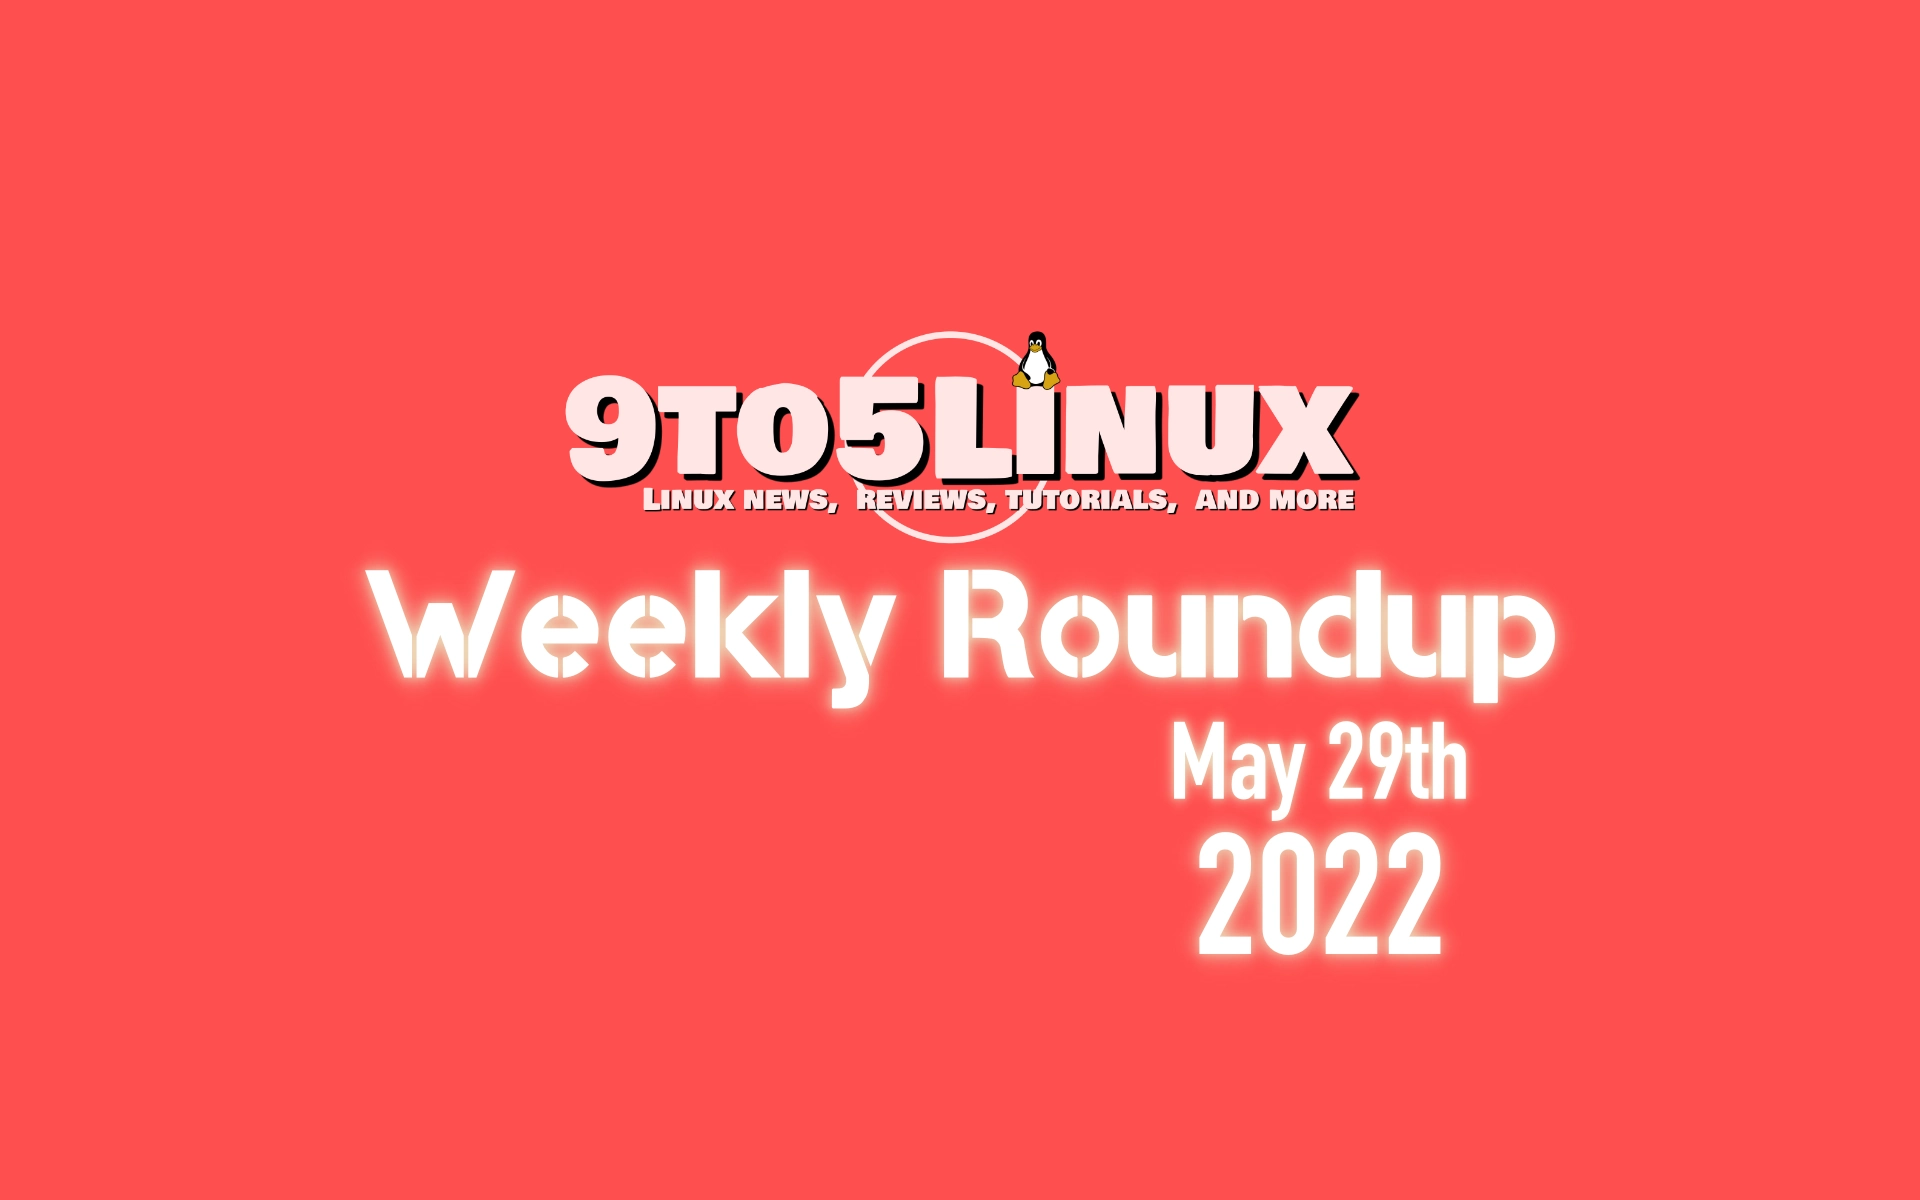 9to5Linux Weekly Roundup: May 29th, 2022